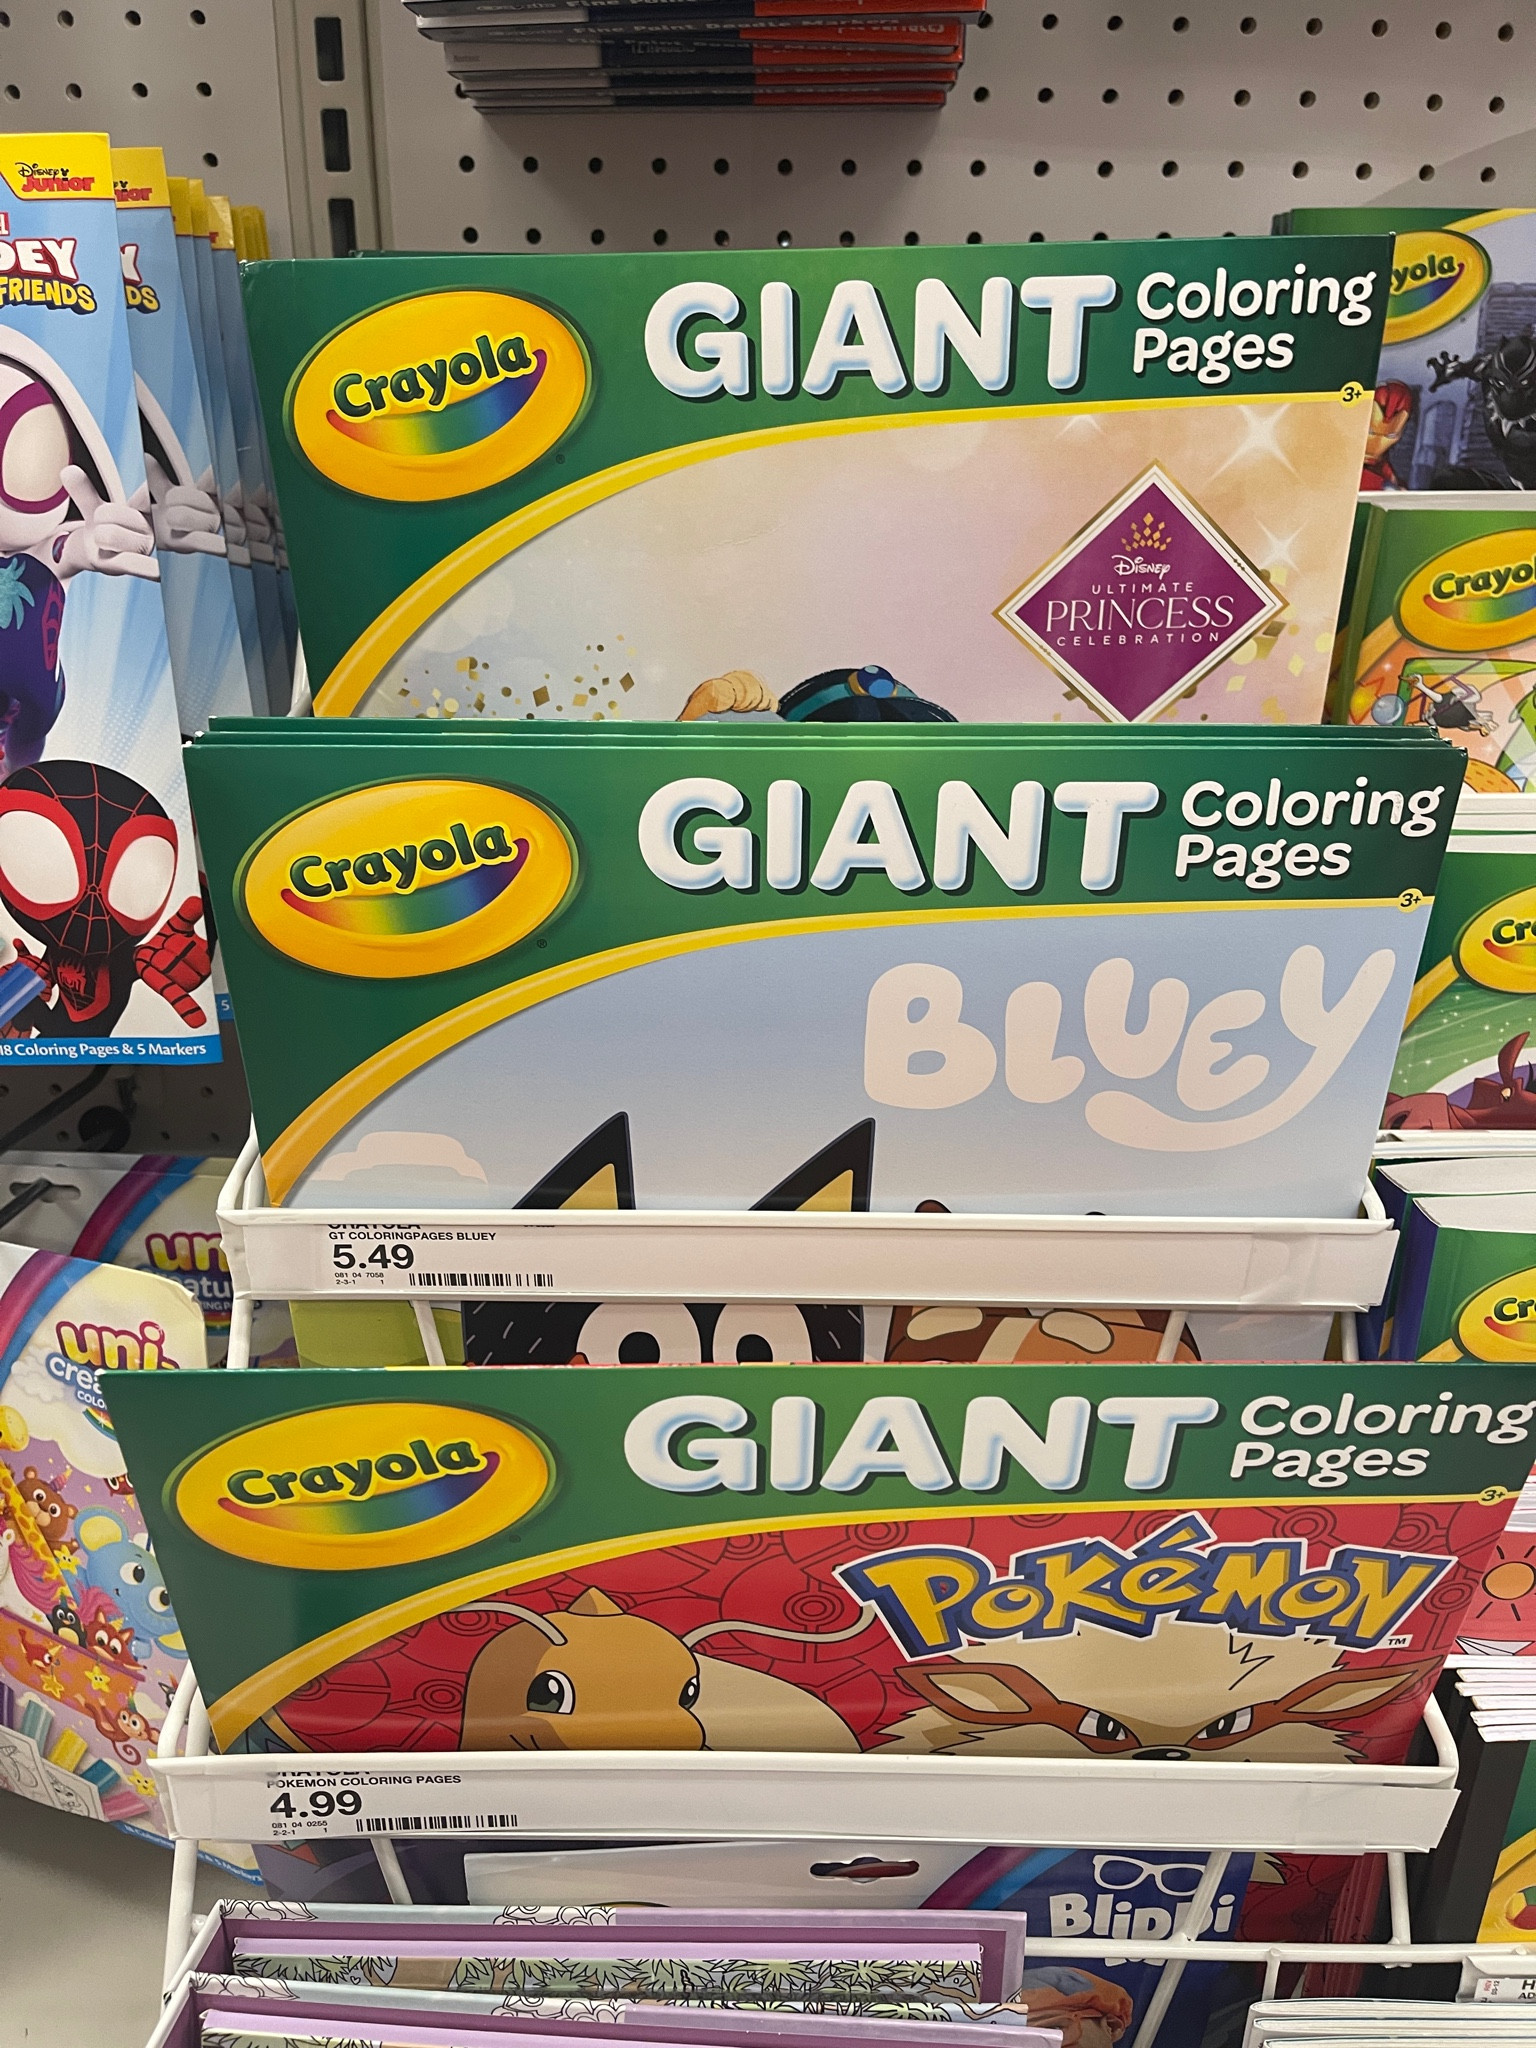 Crayola Giant Coloring Pages - Bluey : Target